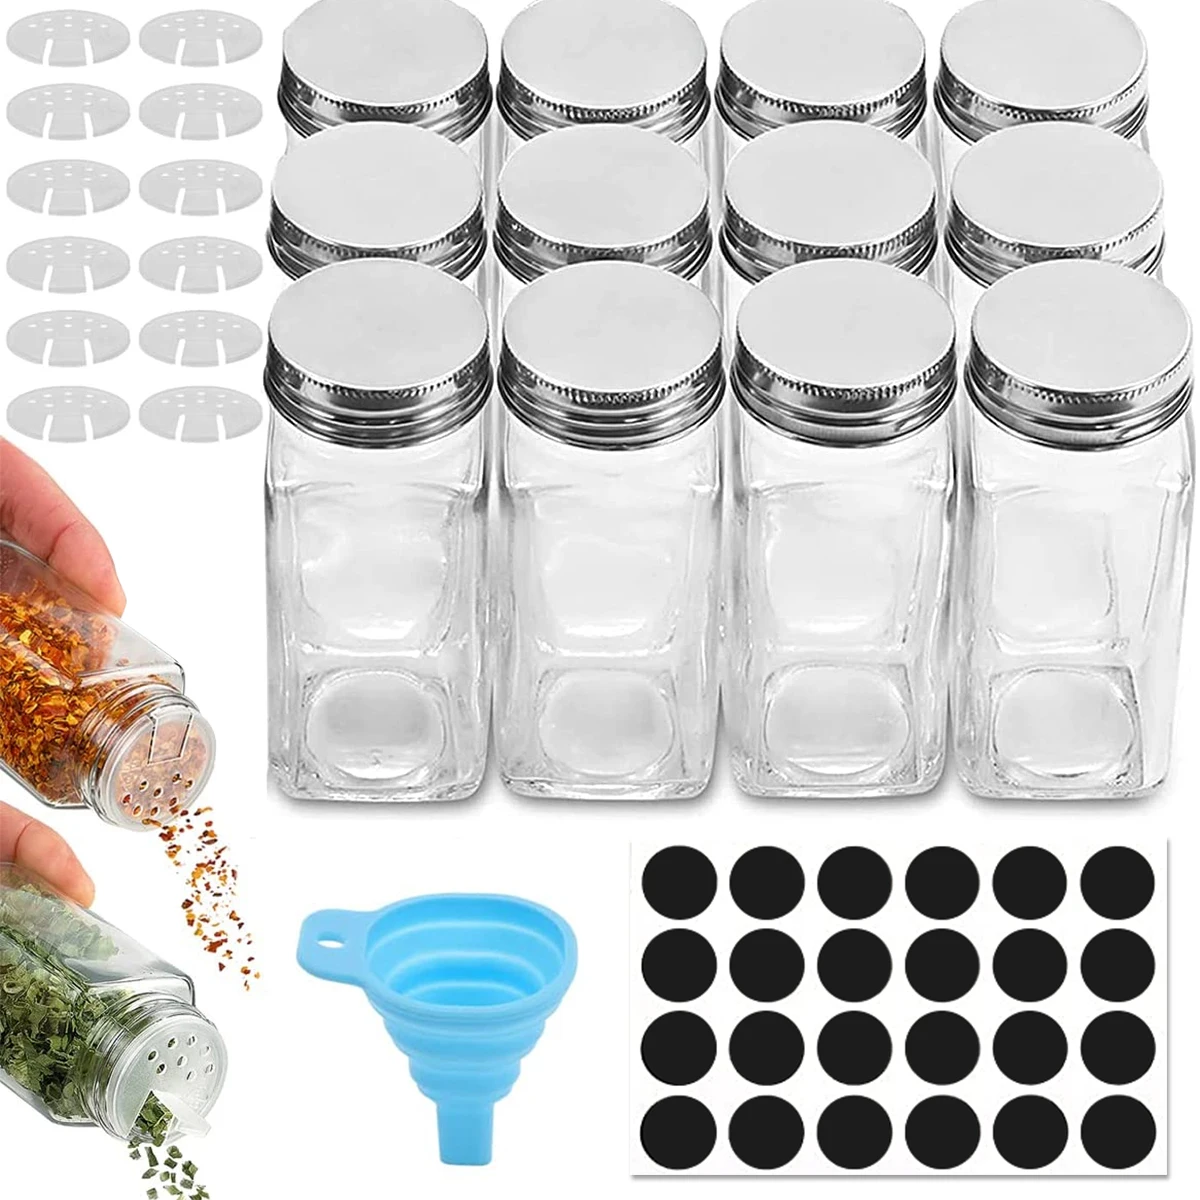  AOZITA 24 Pcs Glass Spice Jars with Labels - 4oz Empty Square  Spice Bottles Containers, Condiment Pot - Shaker Lids and Airtight Metal  Caps - Silicone Collapsible Funnel Included: Home & Kitchen